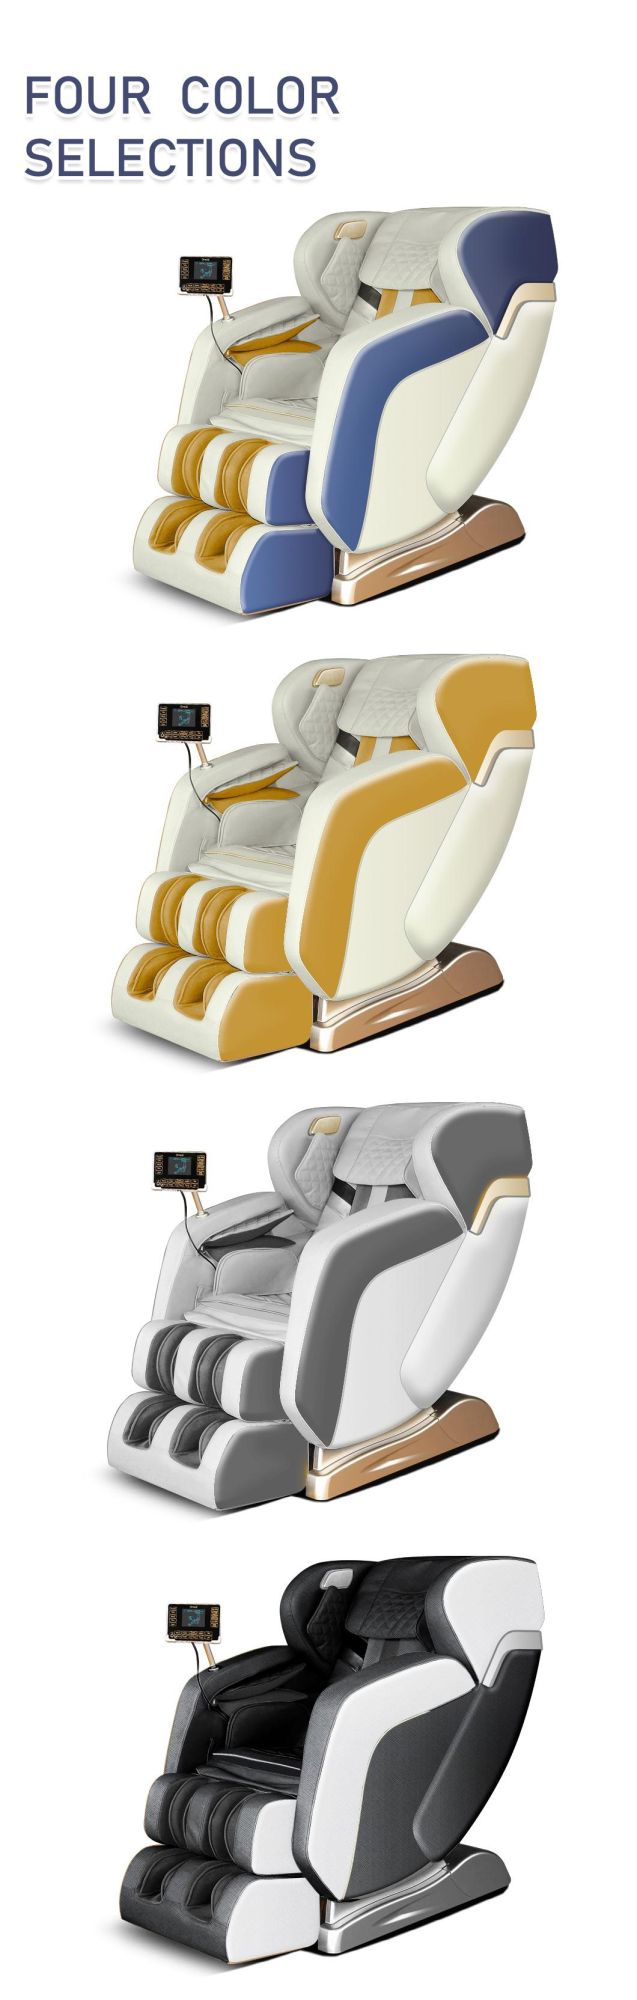 New Design Luxury 4D SL Track Zero Gravity Massage Chair Sofa for Heavy and Tall People